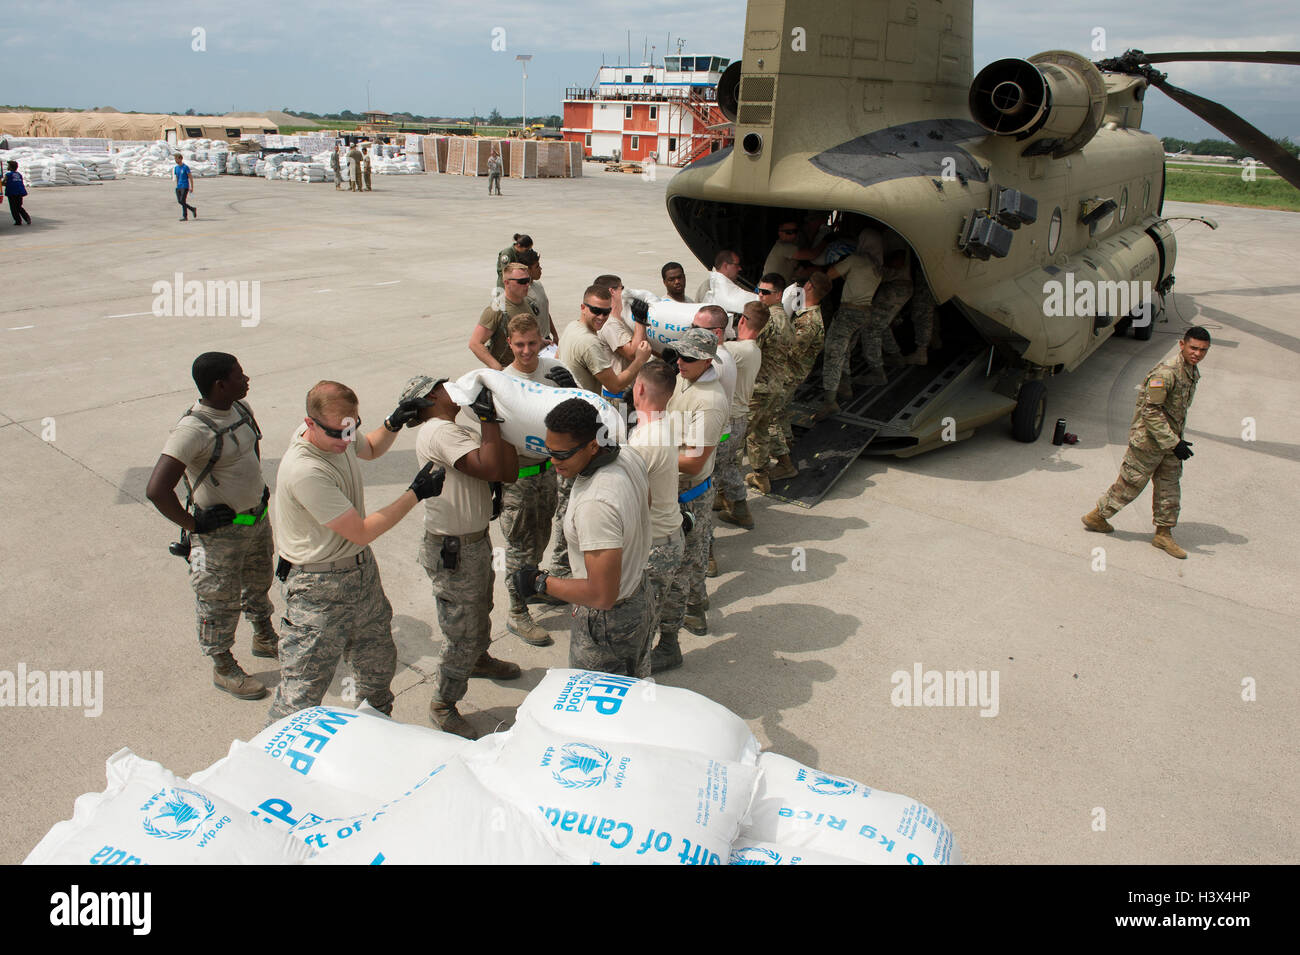 Dame Marie, Haiti. 12th October, 2016. U.S service members unload humanitarian relief supplies for Haitians affected by Hurricane Matthew October 12, 2016 in Port-au-Prince, Haiti. Hurricane Matthew struck Haiti with winds over 140-mph killing 500 people and causing widespread damage. Credit:  Planetpix/Alamy Live News Stock Photo